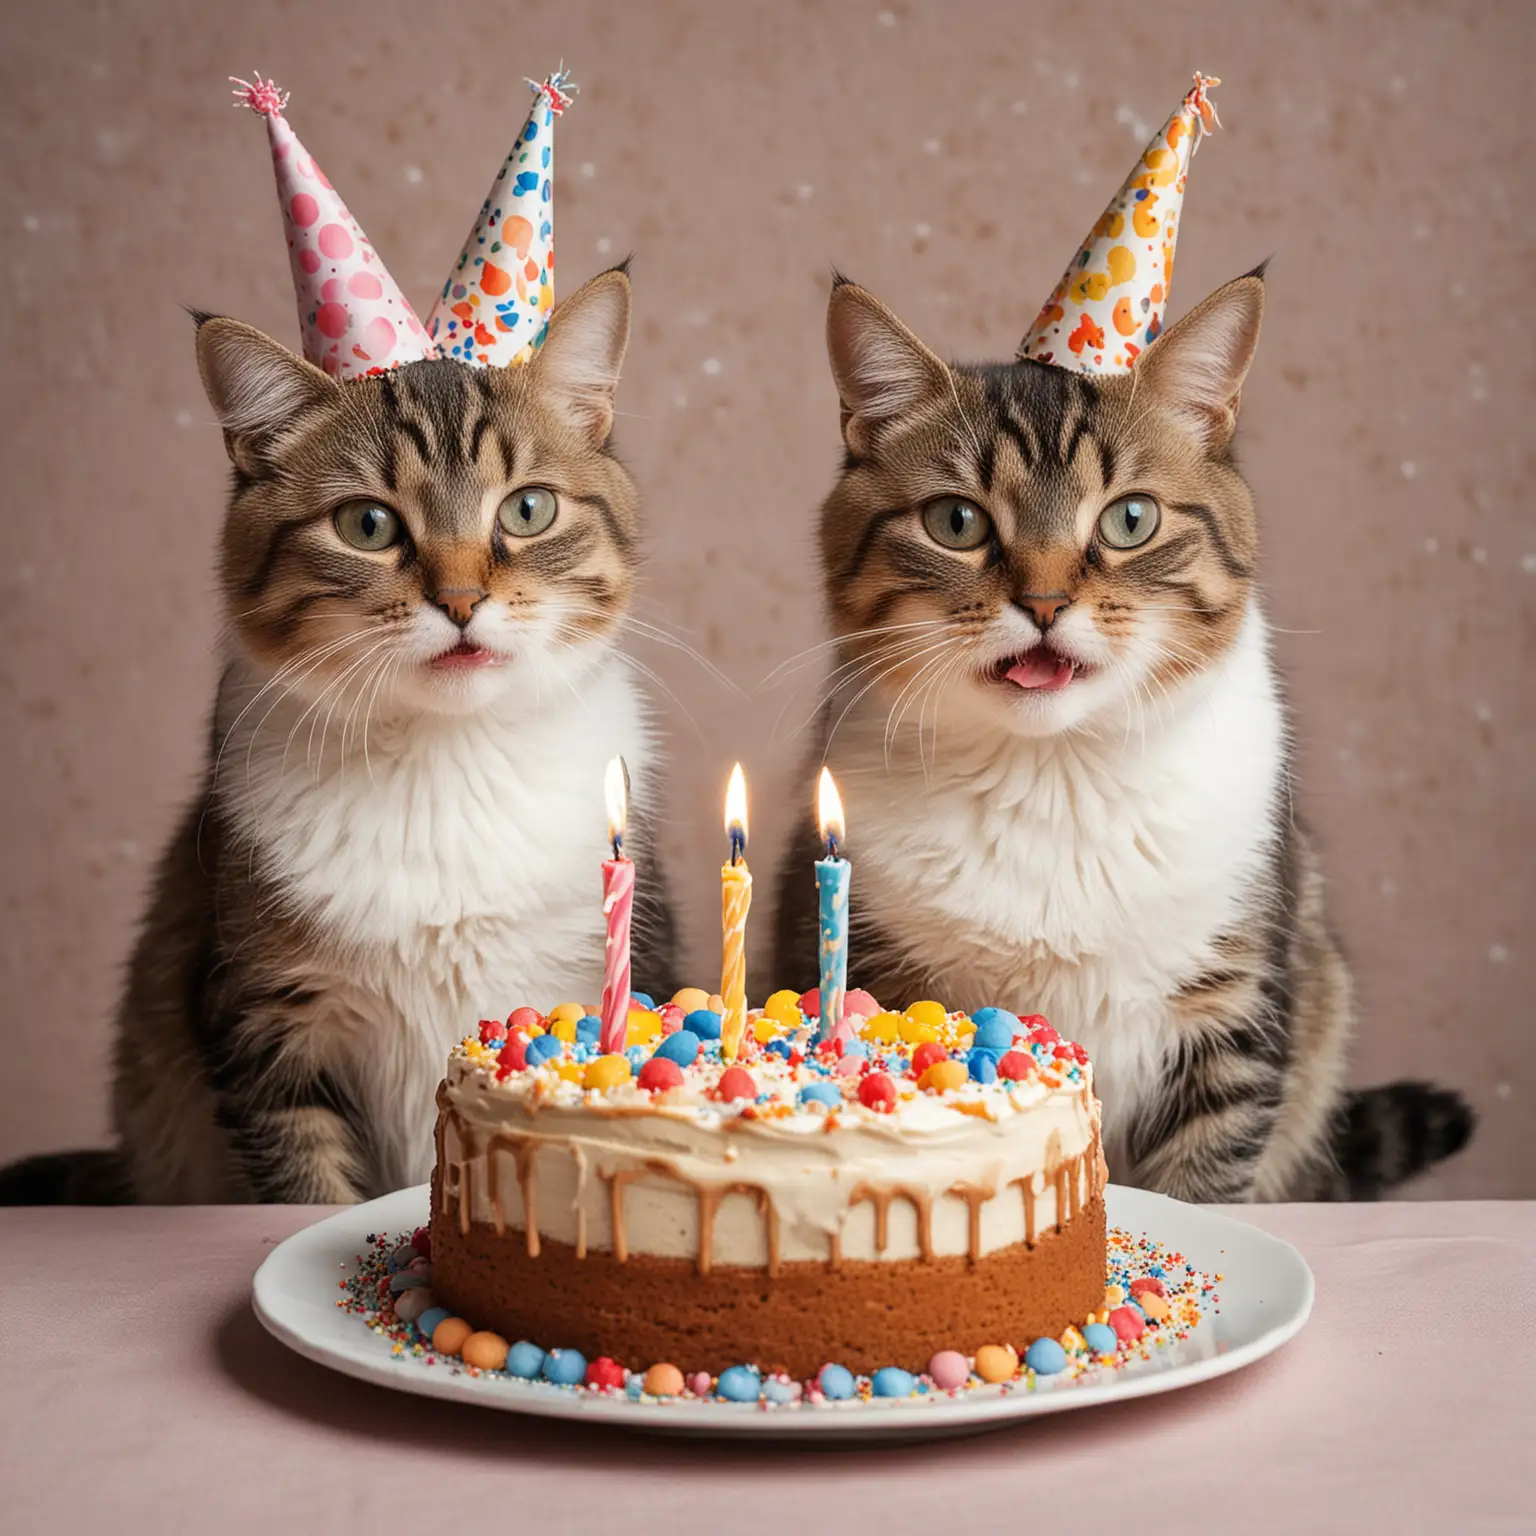 two cats are enjoying a birthday cake